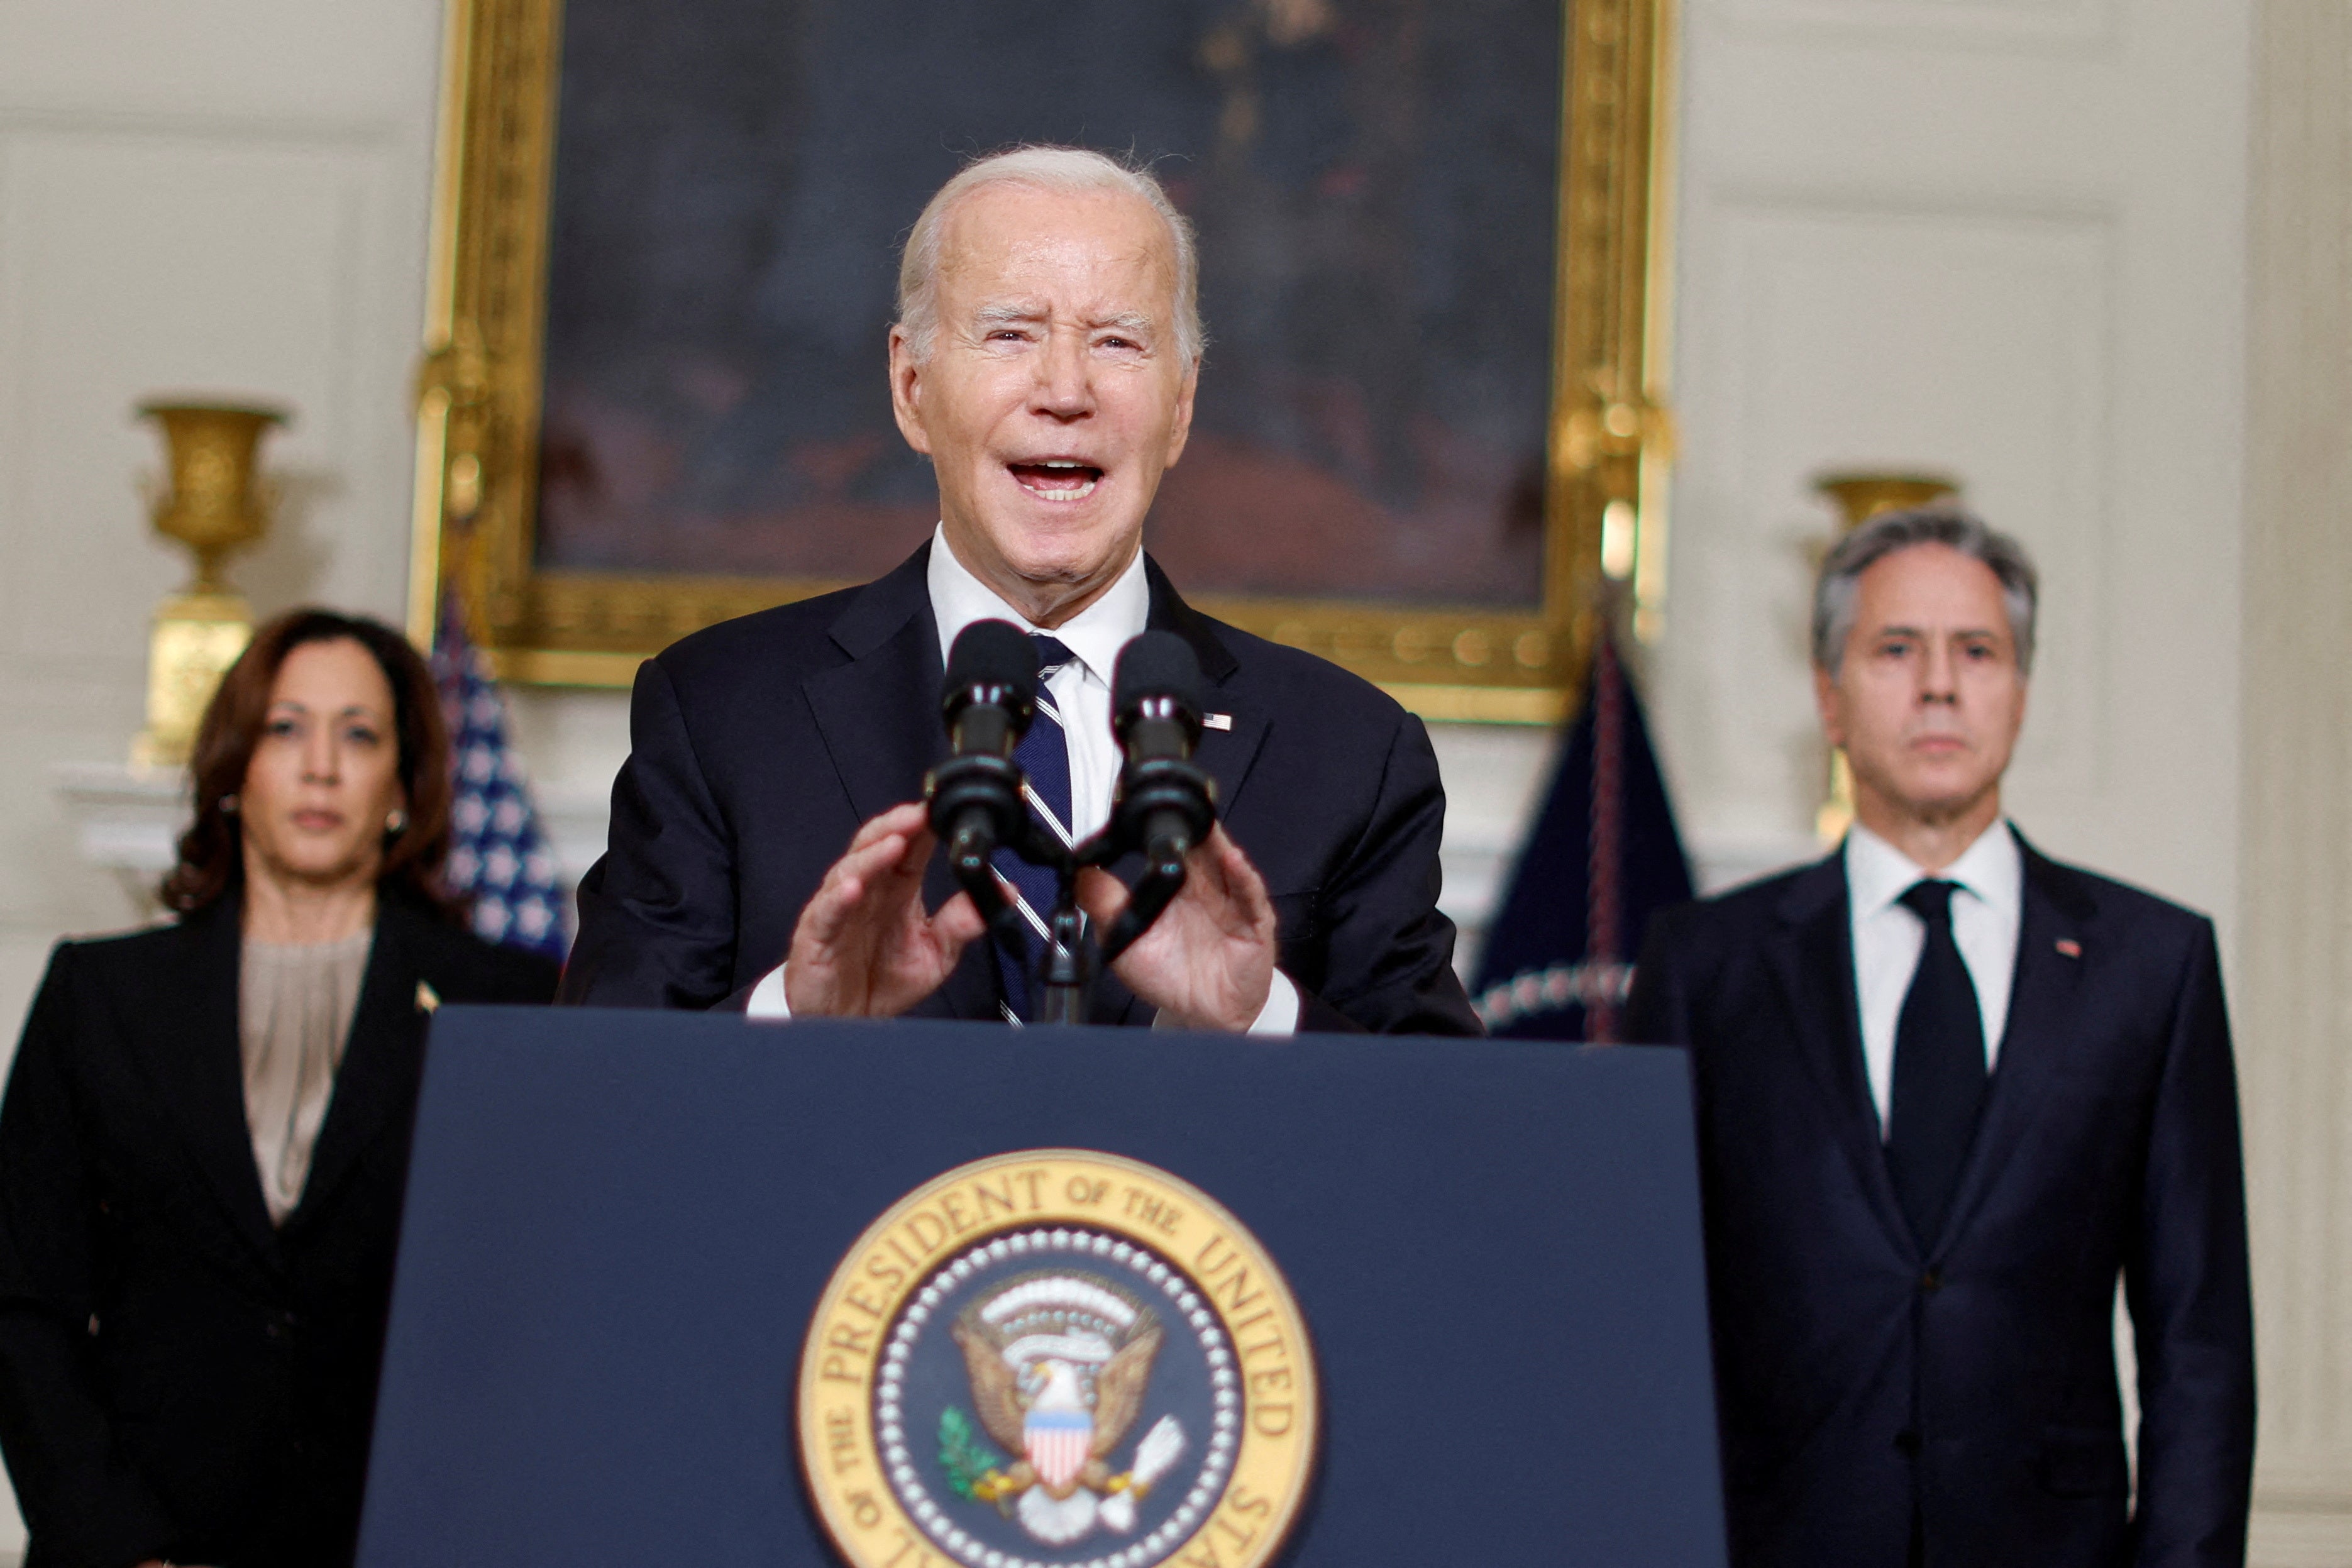 U.S. President Joe Biden, accompanied by Vice President Kamala Harris and U.S. Secretary of State Antony Blinken, makes remarks after speaking by phone with Israeli Prime Minister Benjamin Netanyahu about the situation in Israel following Hamas’ deadly attacks, from the State Dining Room at the White House in Washington, U.S. October 10, 2023.